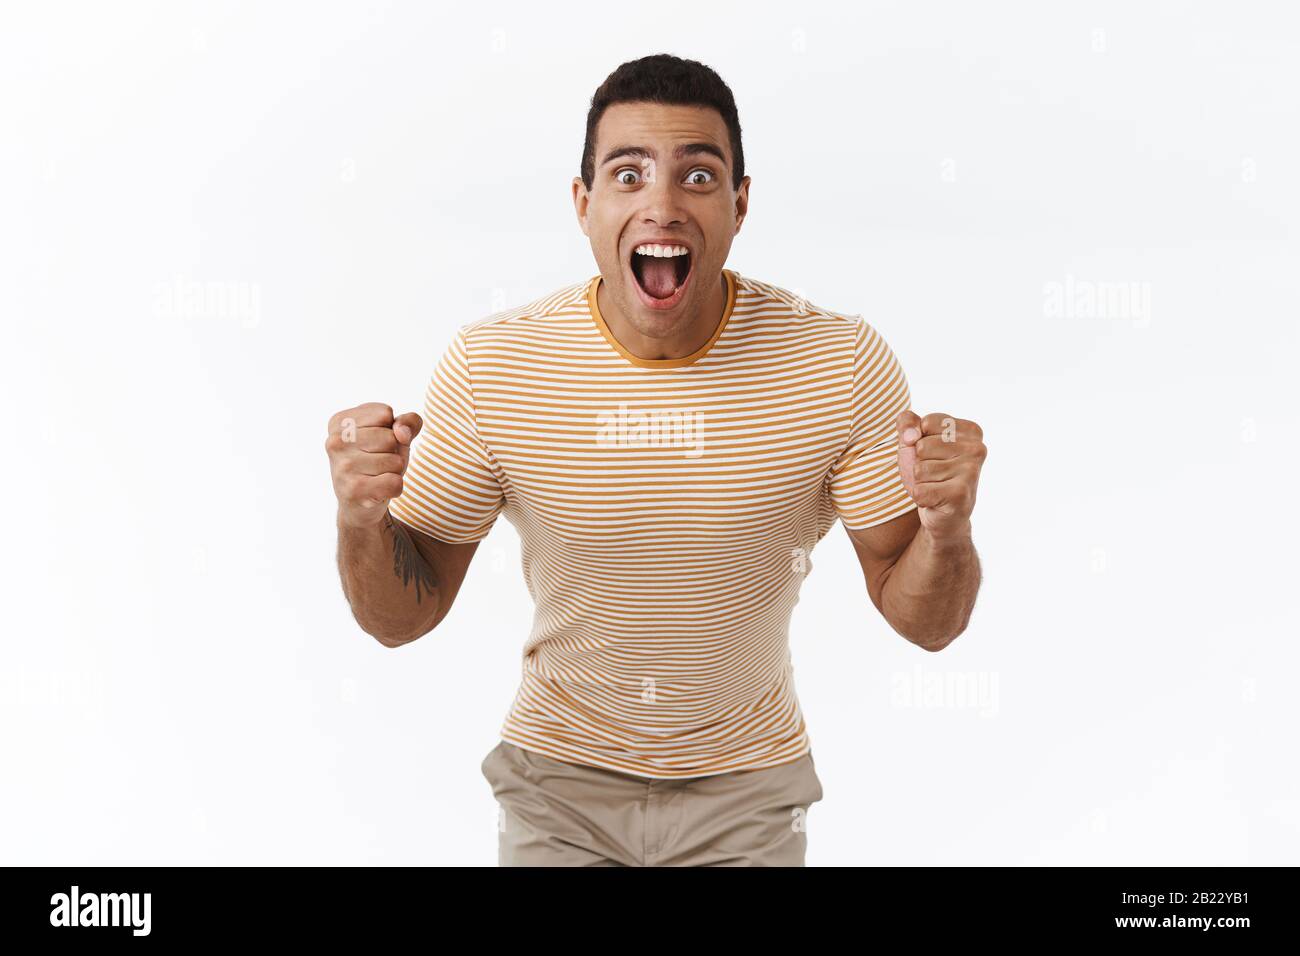 Pumped, excited handsome masculine guy winning big money, looking at score or sport match with happy, relieved expression, accomplish goal, fist pump Stock Photo